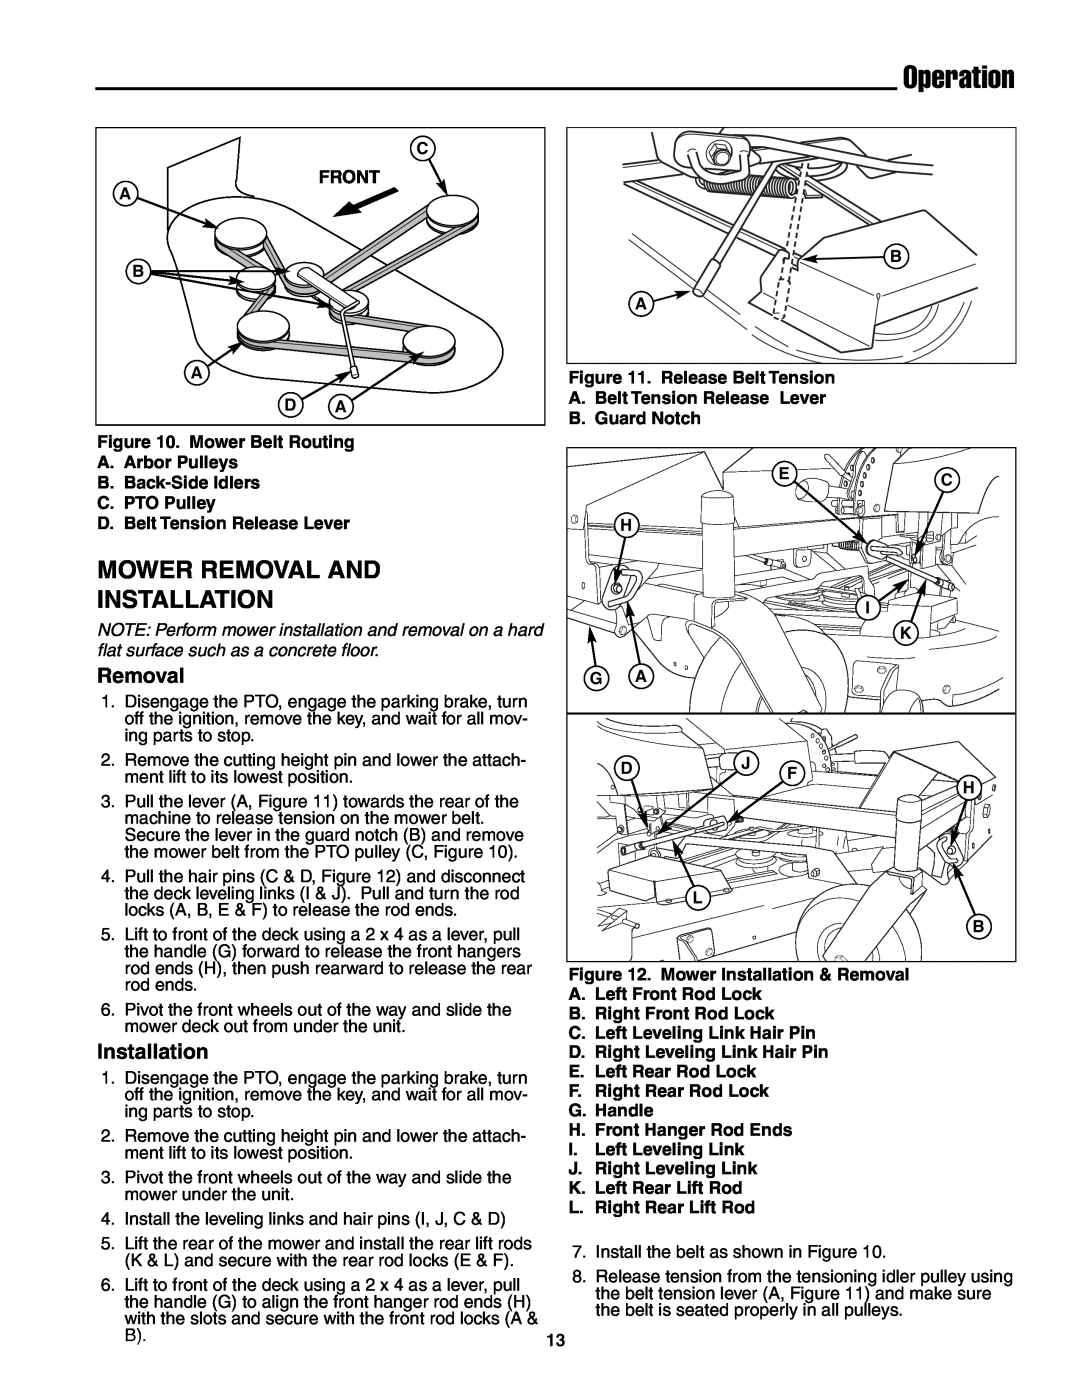 Snapper ZT18441KHC, ZT20501BV, ZT19441KWV important safety instructions Mower Removal And Installation, Operation 